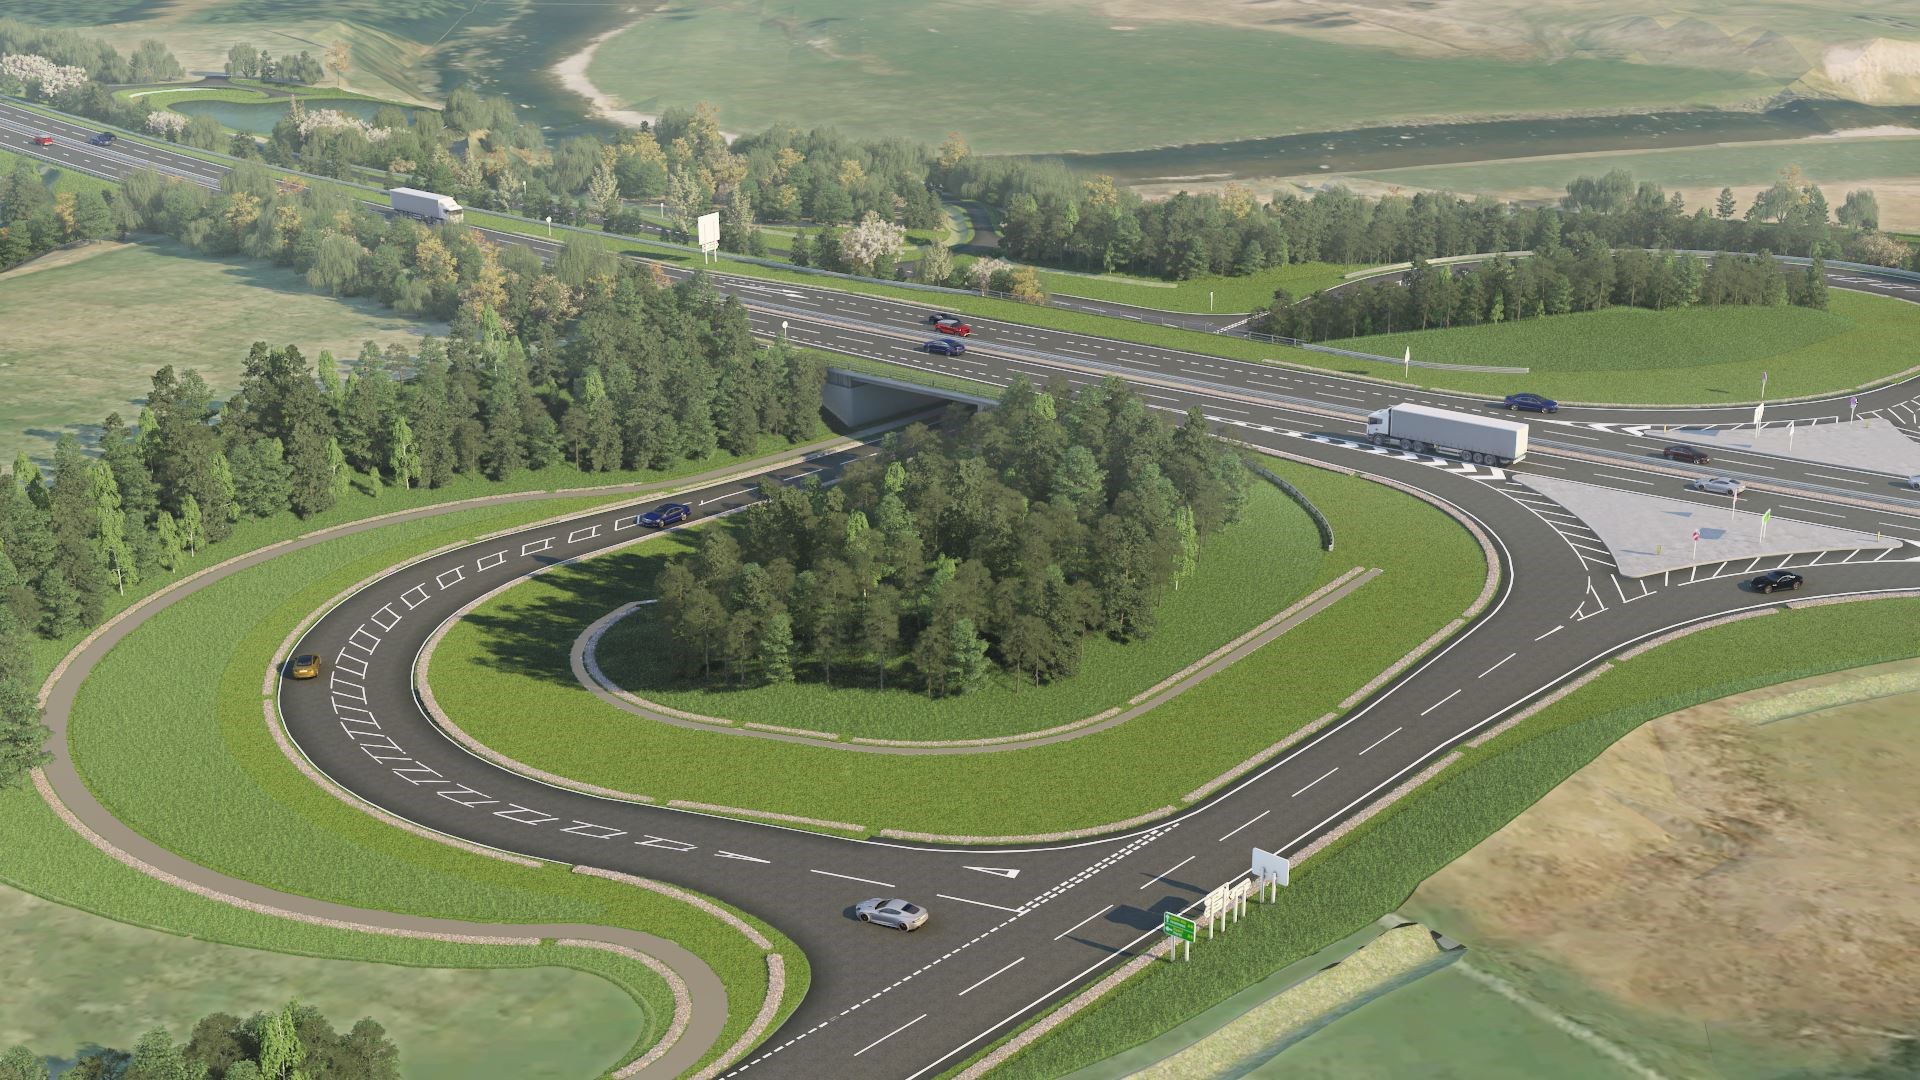 The Tomatin to Moy section of the A9 dualling project was budgeted at £115 million but only attracted one bidder.